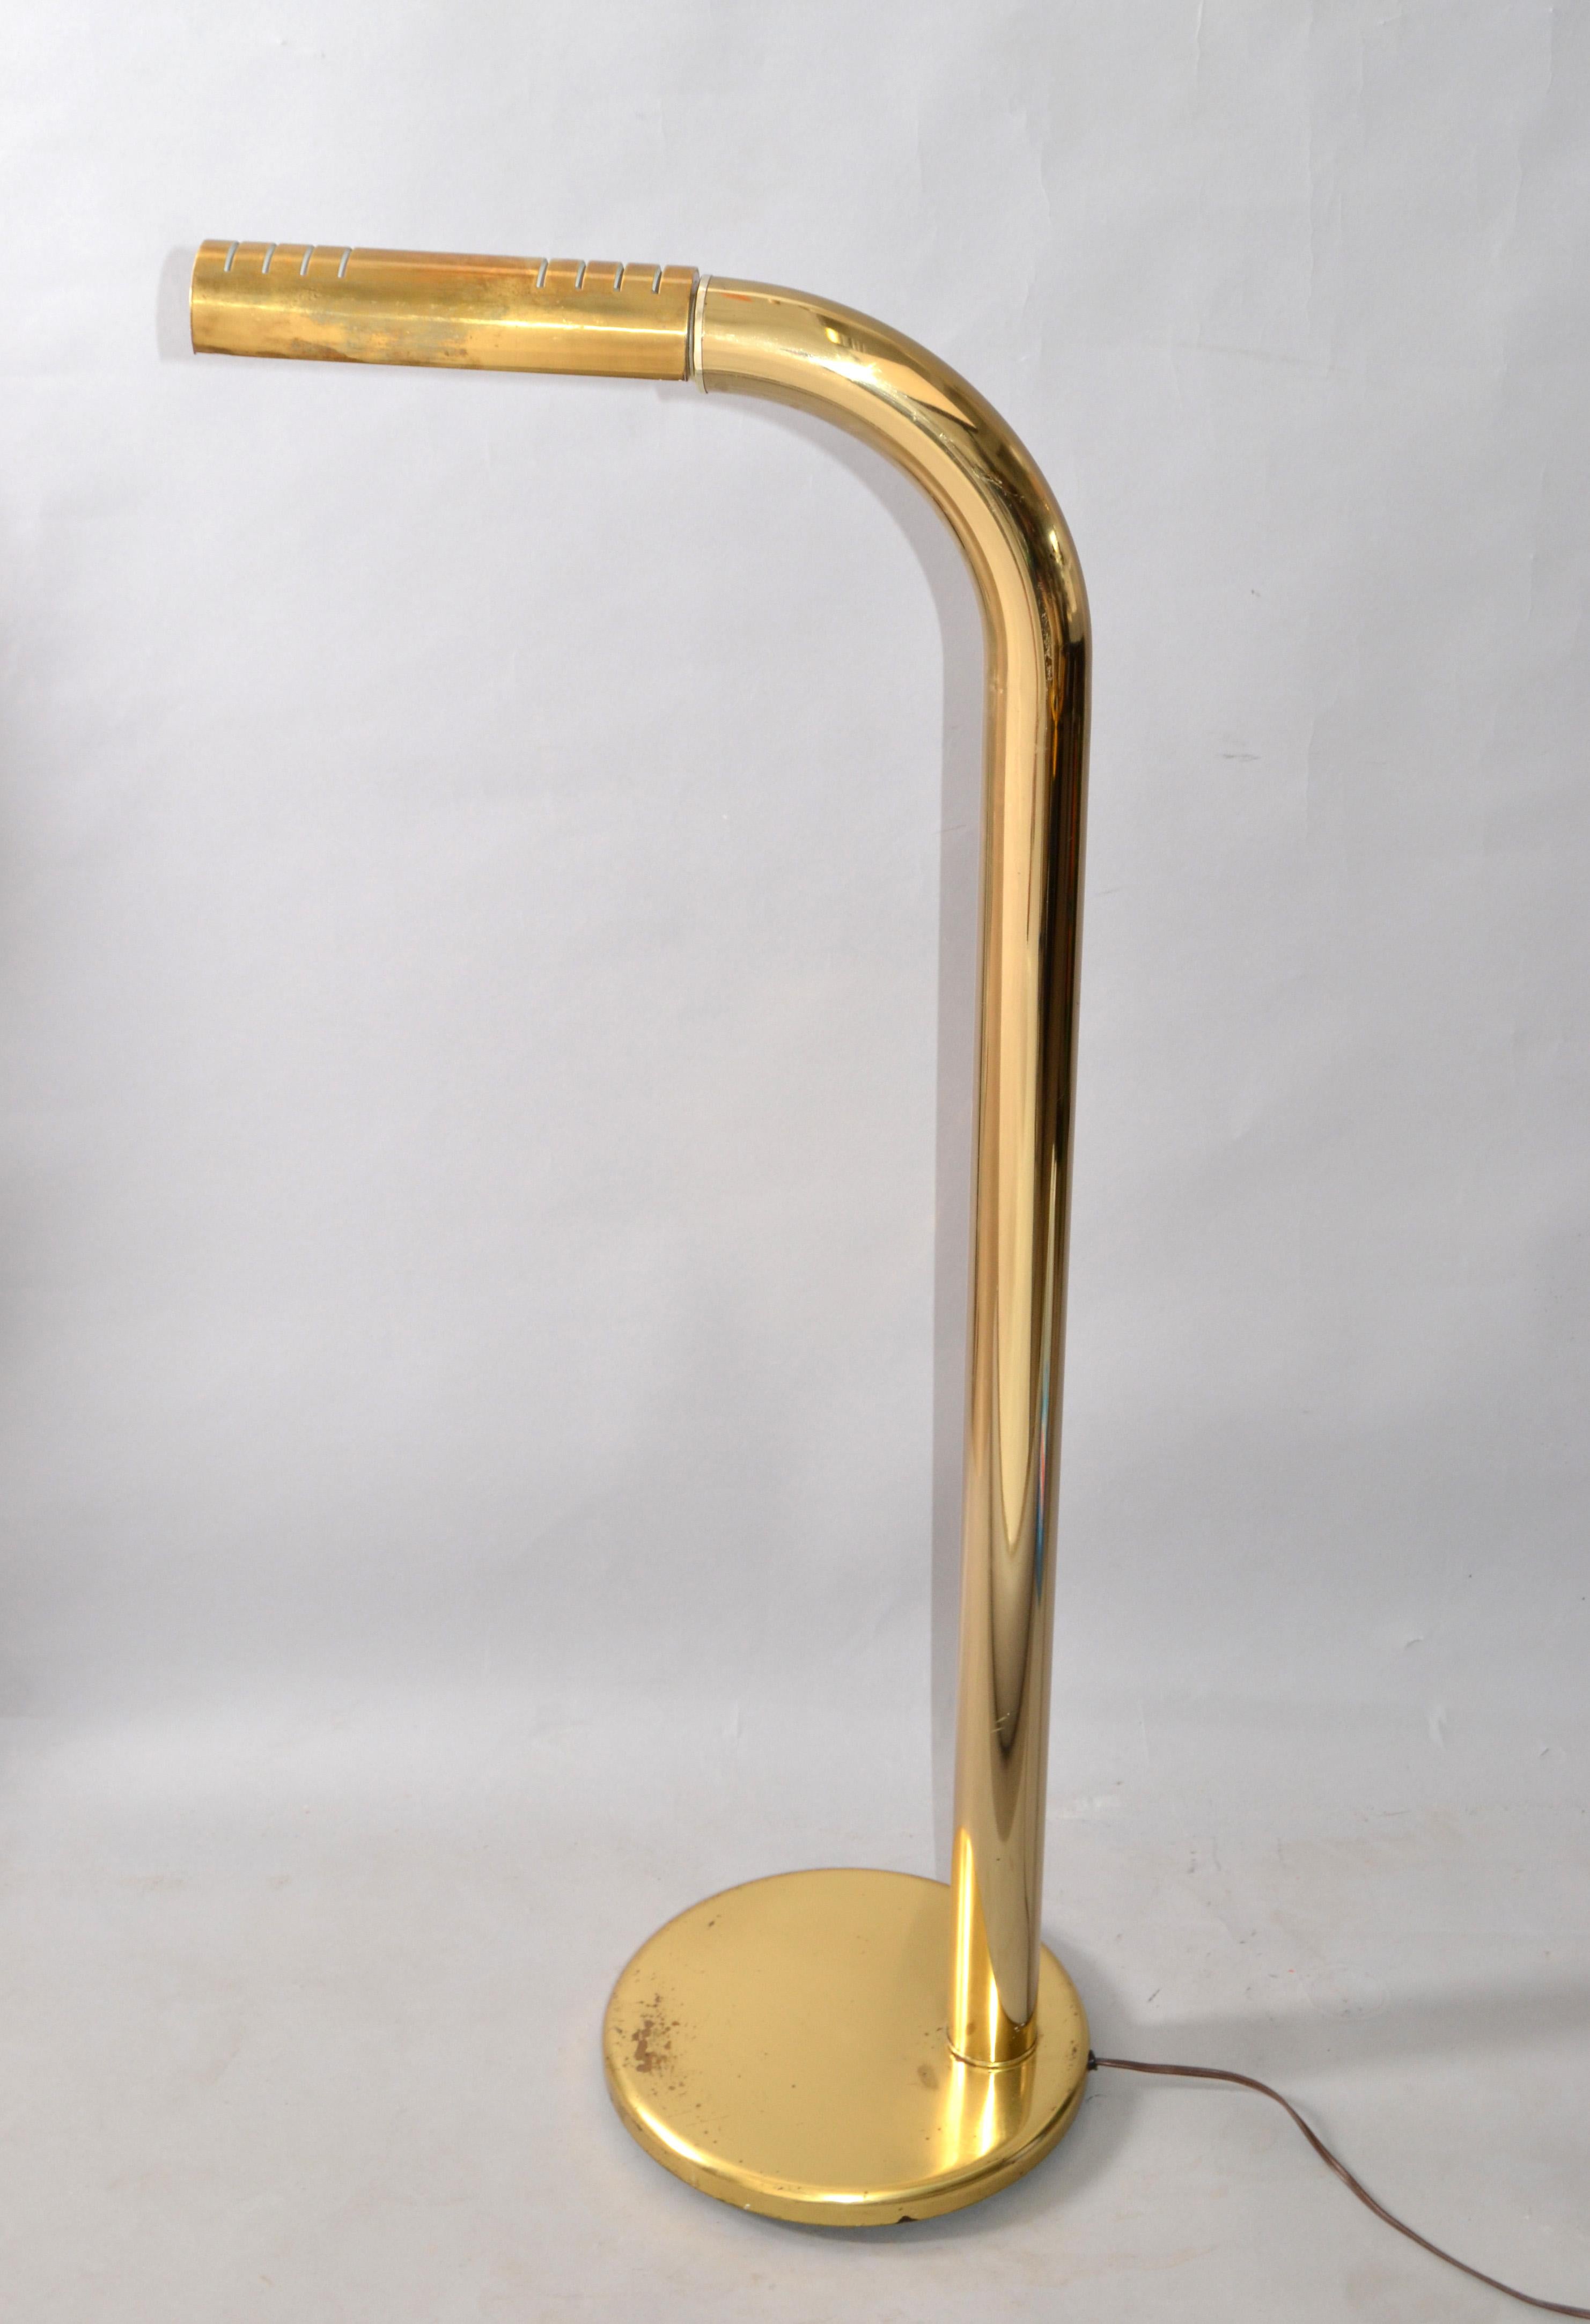 Mid-Century Modern American Space Age unique vintage brass finished floor lamp designed by Jim Bindman for Rainbow Lamp Company. The lamp is working with touch sensor on the lamp head. In good age-appropriate condition with some minor marks and